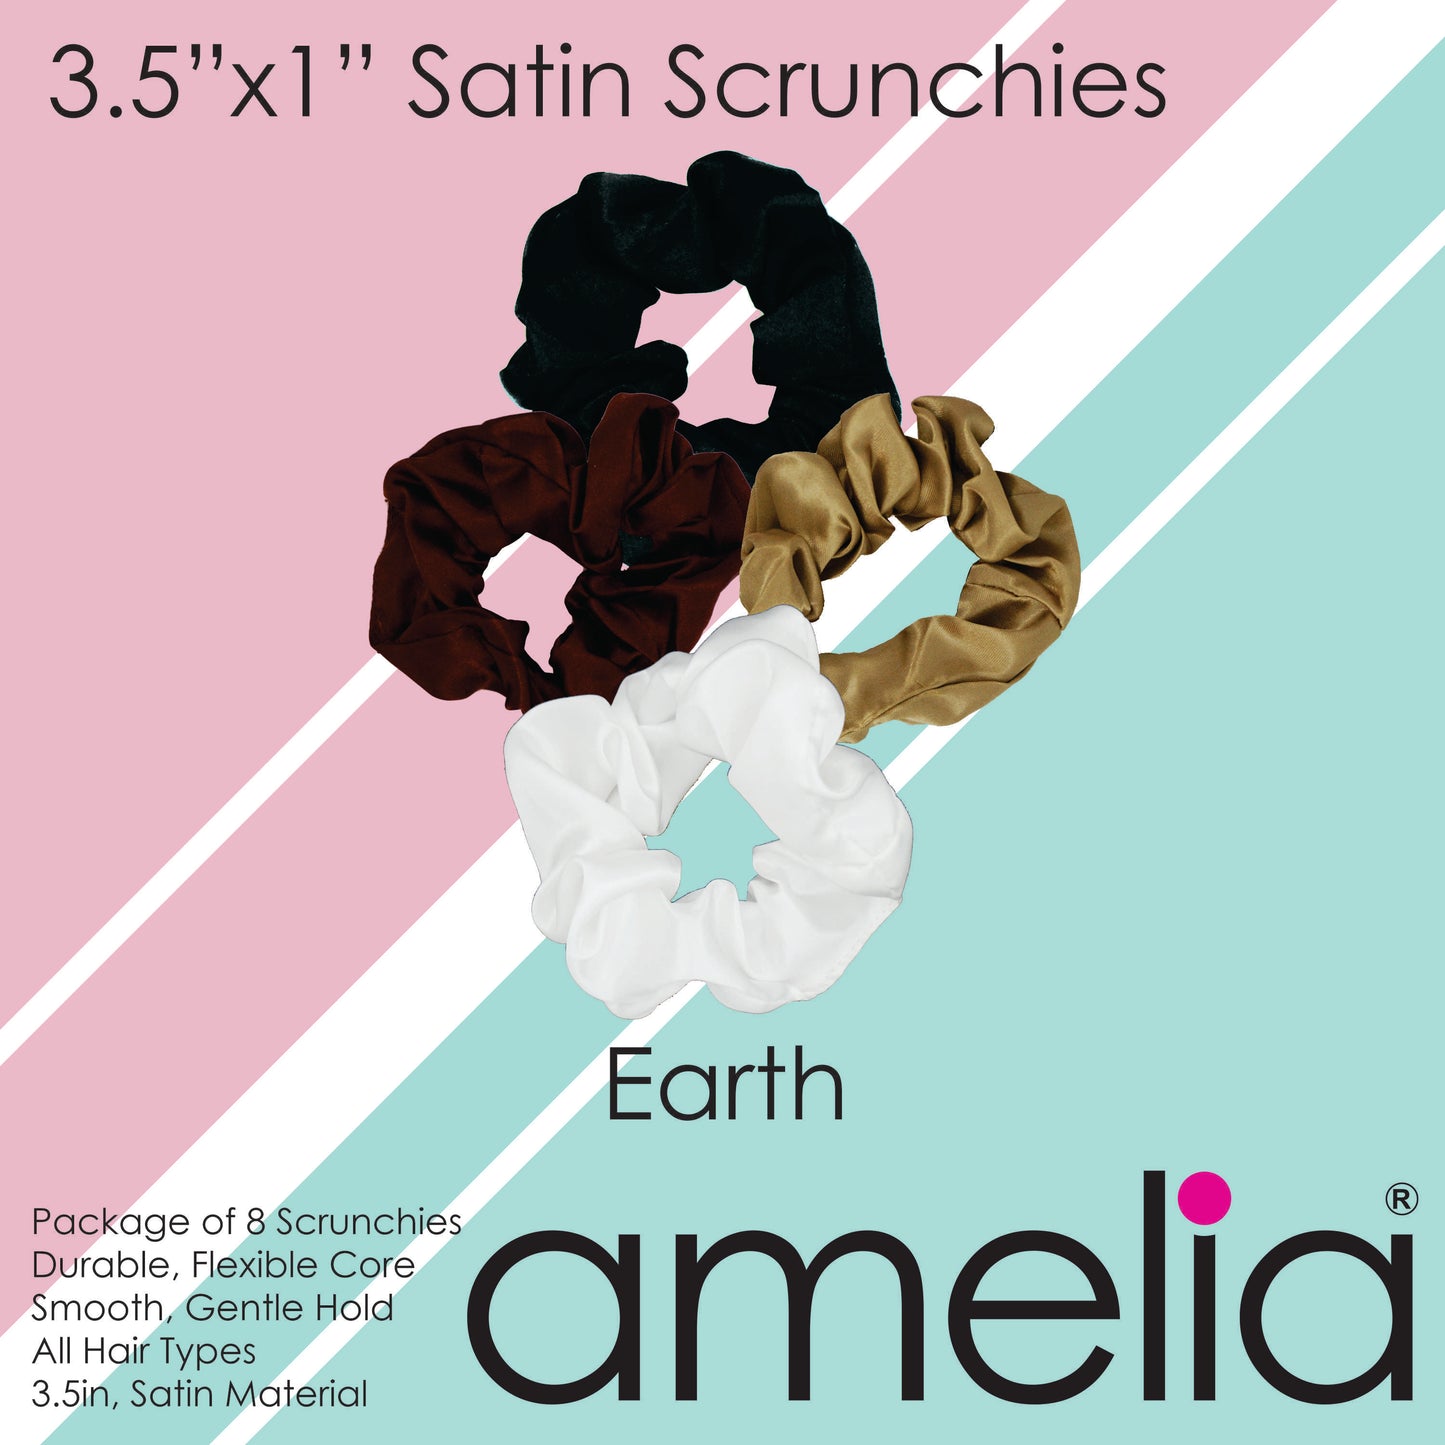 Amelia Beauty Products,  Earth Blend Satin Scrunchies, 3.5in Diameter, Gentle on Hair, Strong Hold, No Snag, No Dents or Creases. 8 Pack